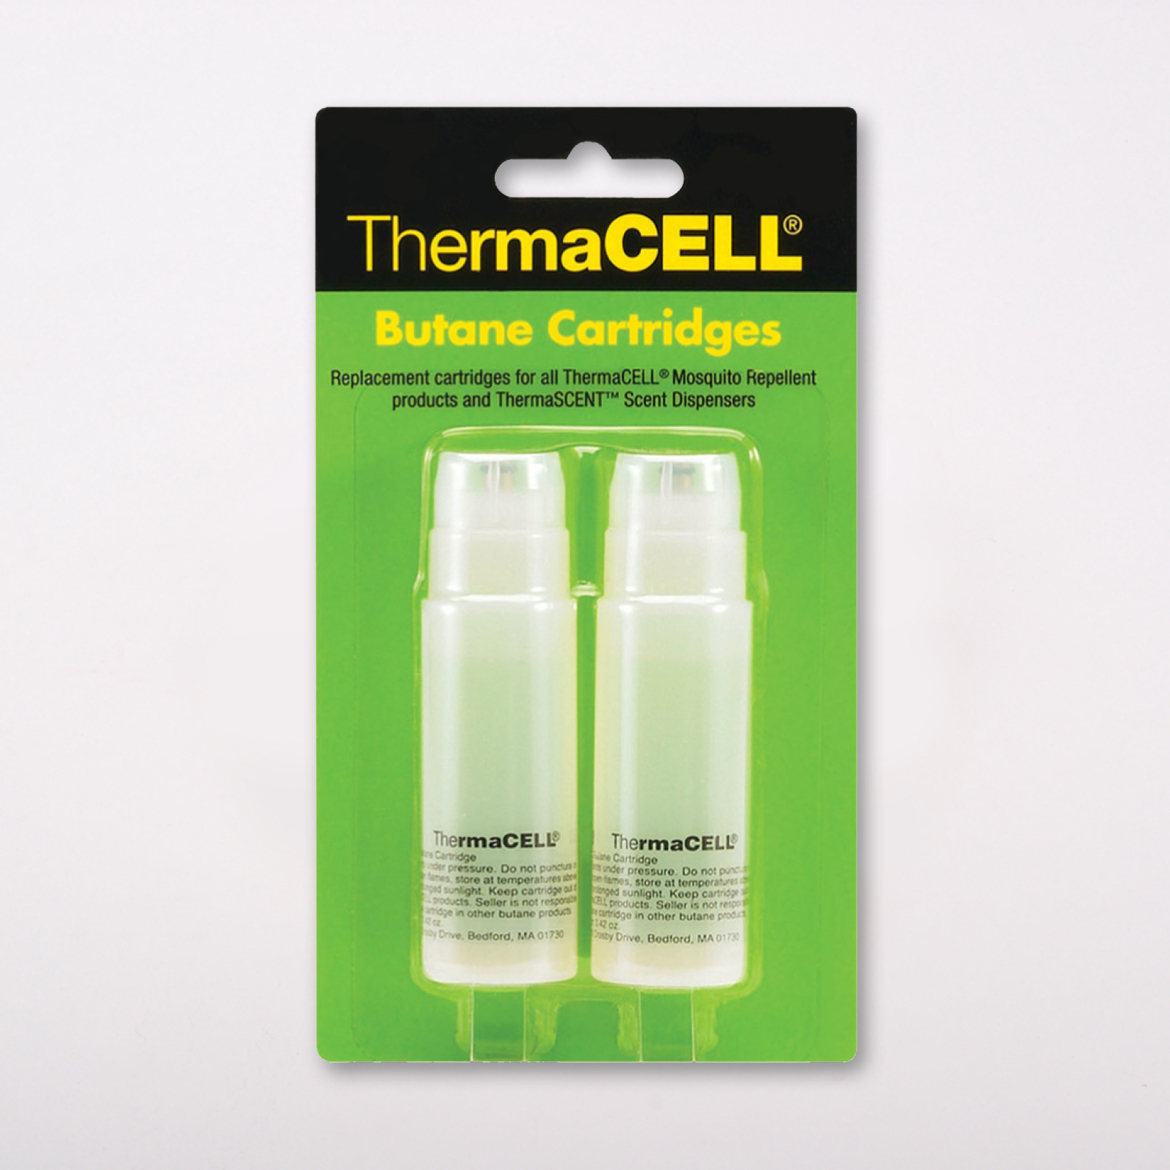 Thermacell C-4 butane gas refill 4 pcs